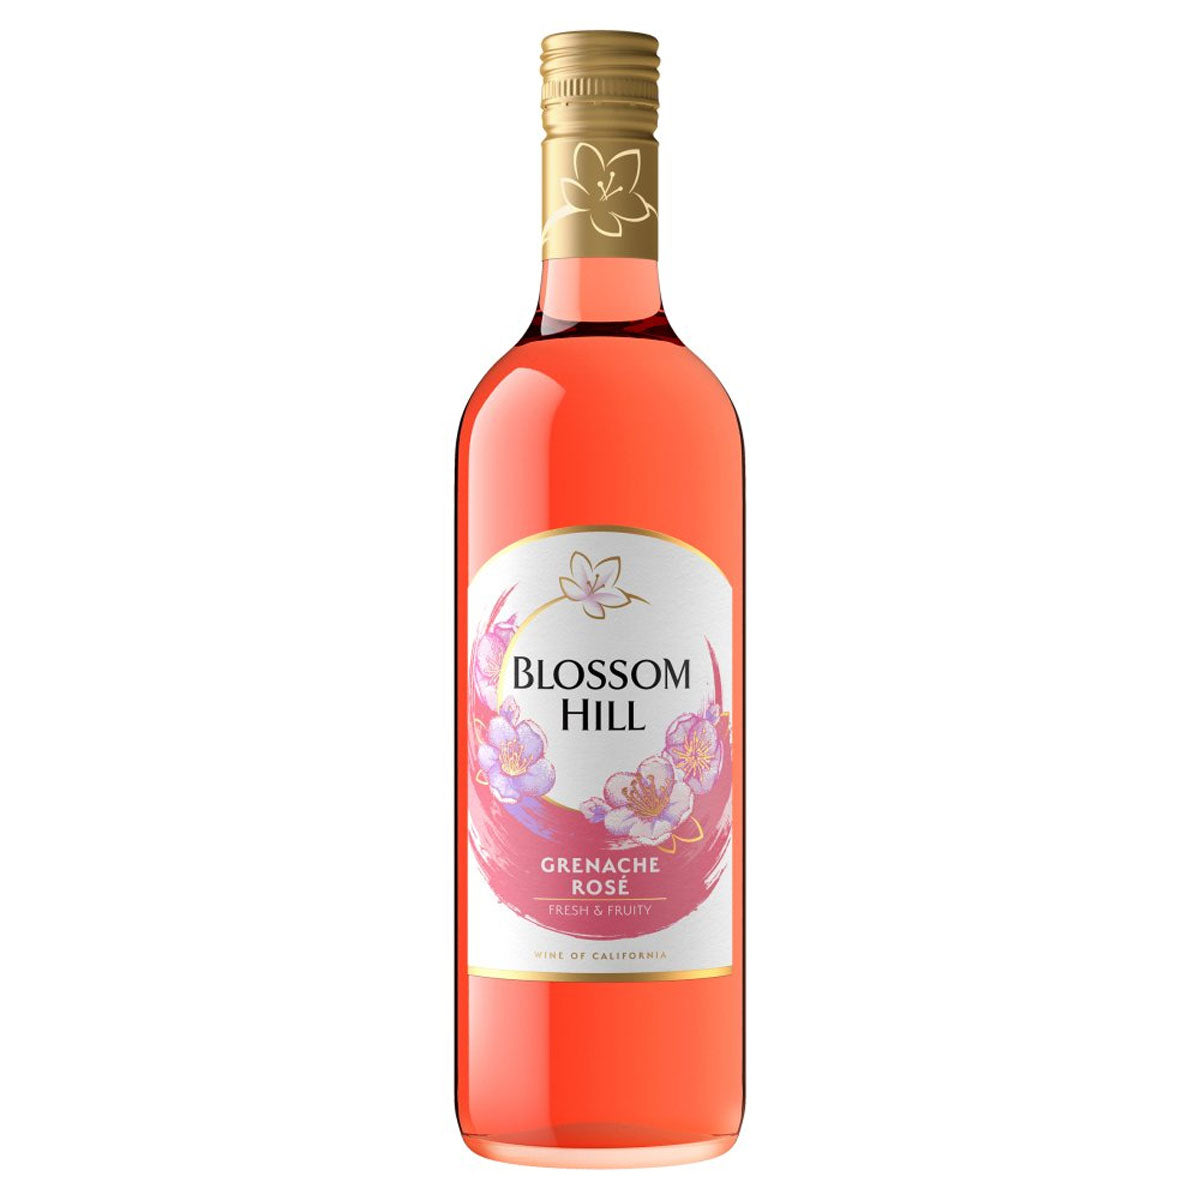 A bottle of Blossom Hill - Grenache Rose (11% ABV) - 750ml wine on a white background.